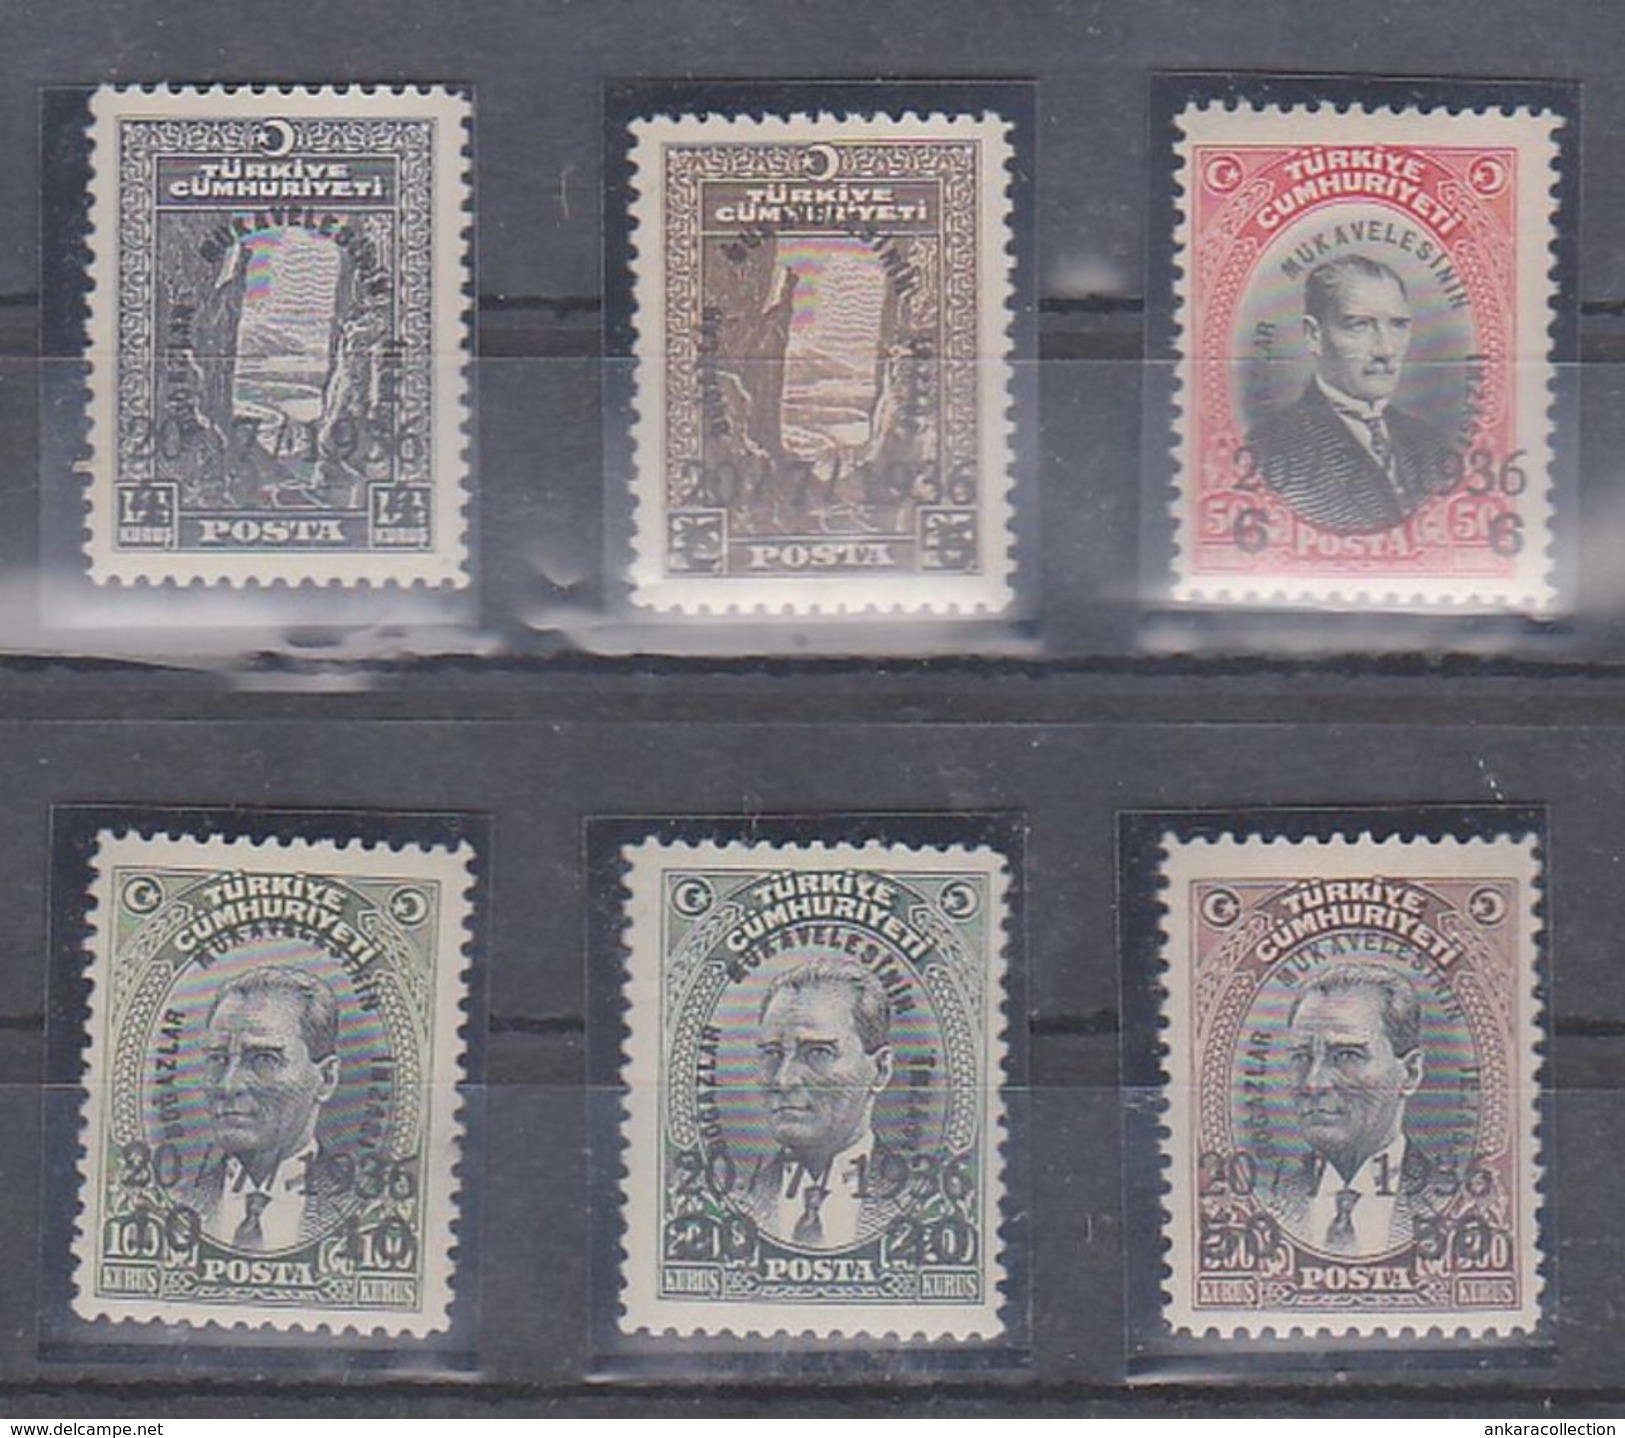 AC - TURKEY STAMP - SURCHARGED COMMEMORATIVE STAMPS FOR THE SIGNATURE OF THE STRAITS SETTLEMENTS MNH 26 OCTOBER 1936 - Neufs